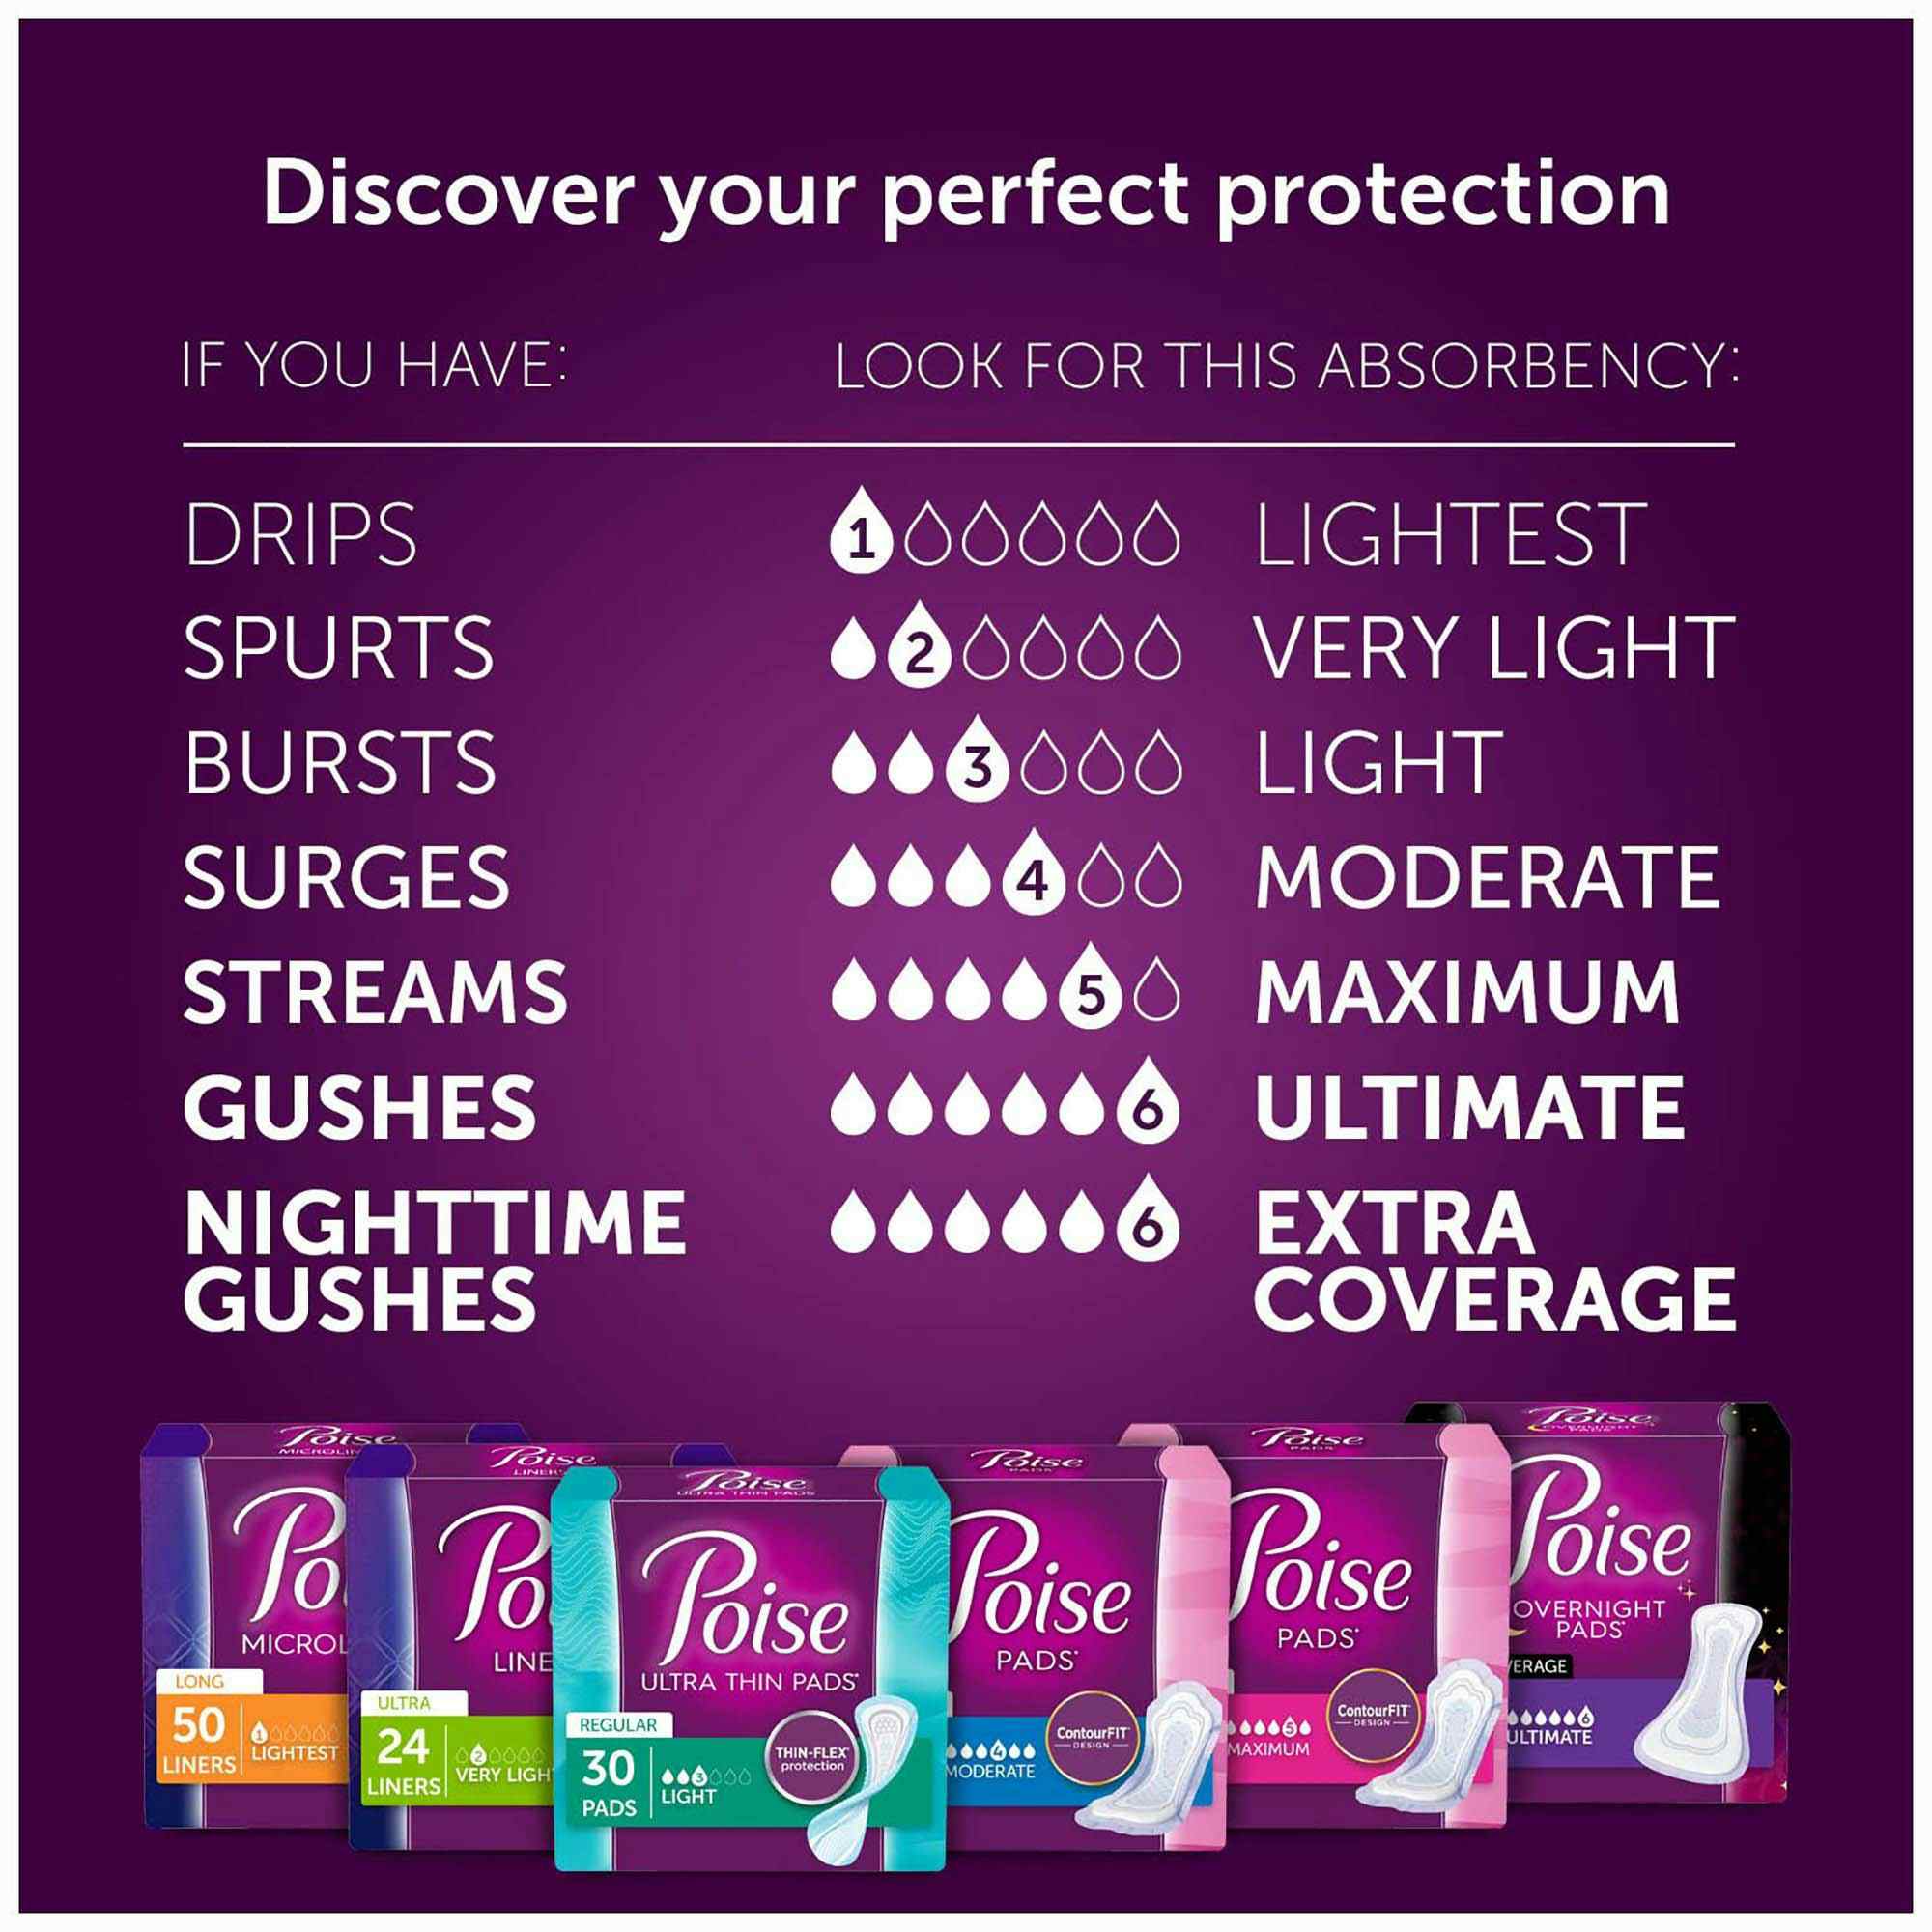 Poise Daily Liners, Very Light